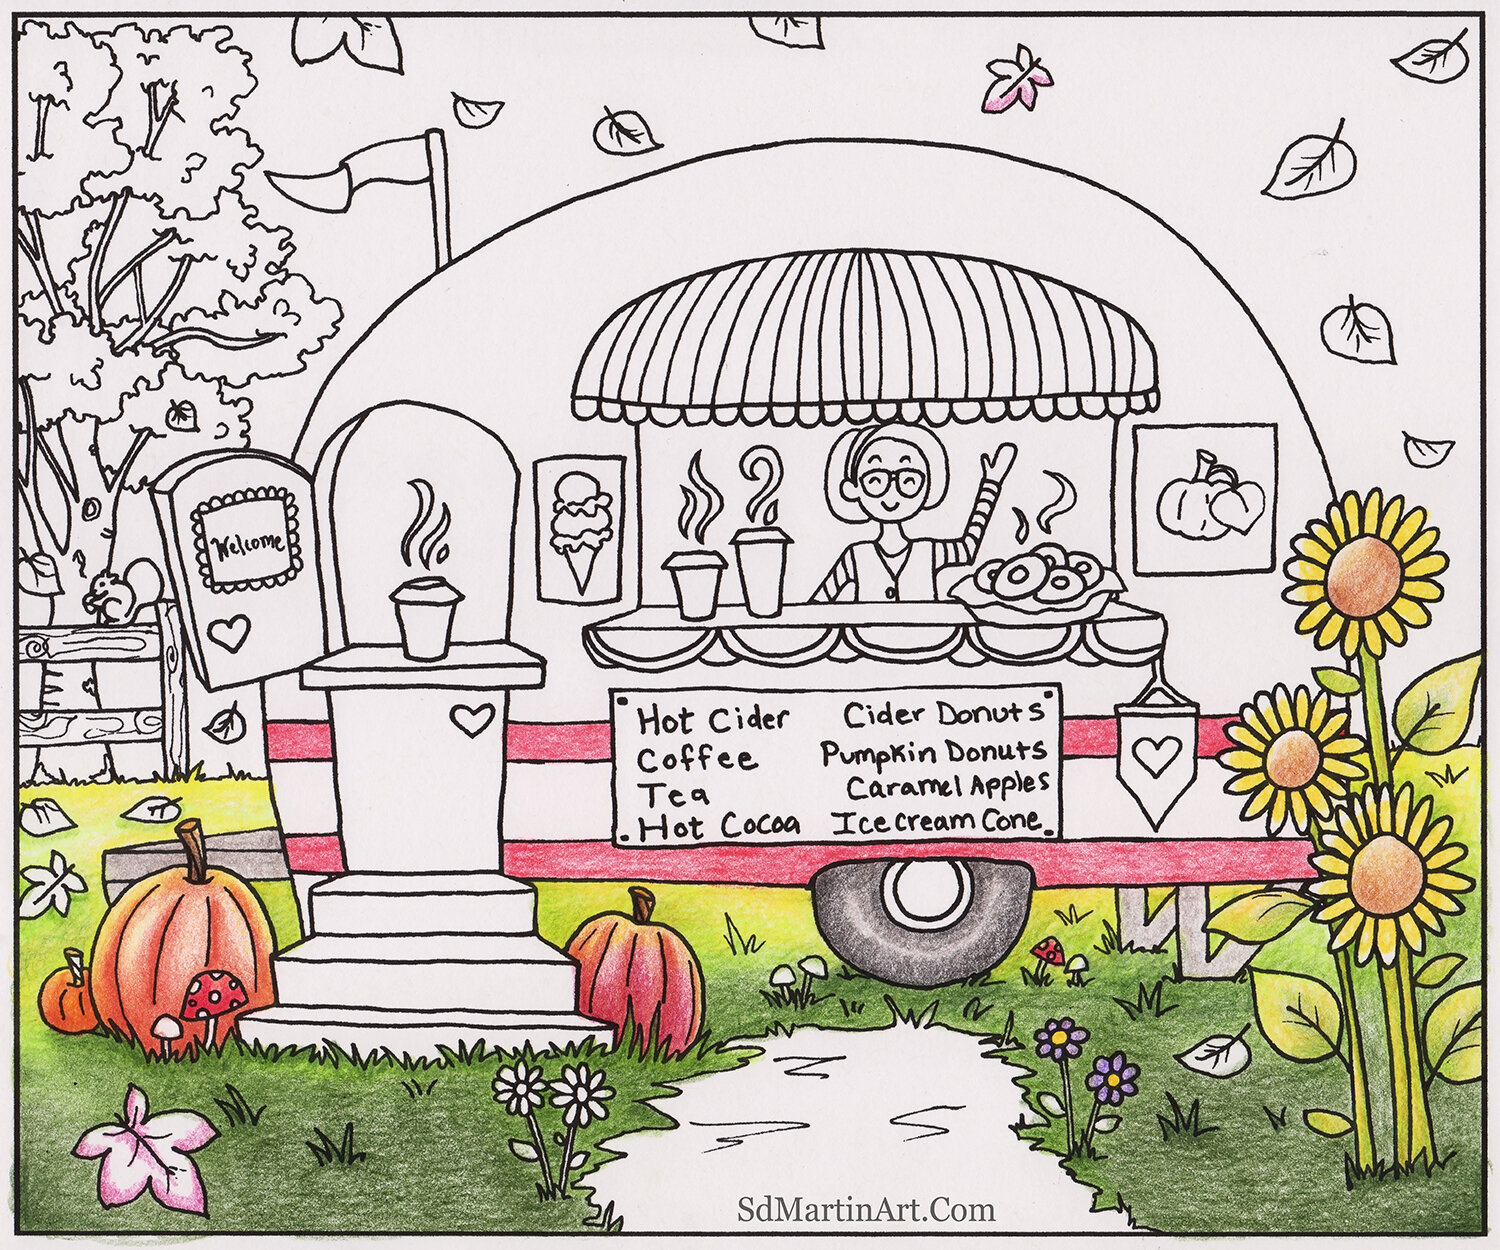 Autumn Coffee Truck_CPG_coloring progress 1_color scan_Edited LR with WM.jpg